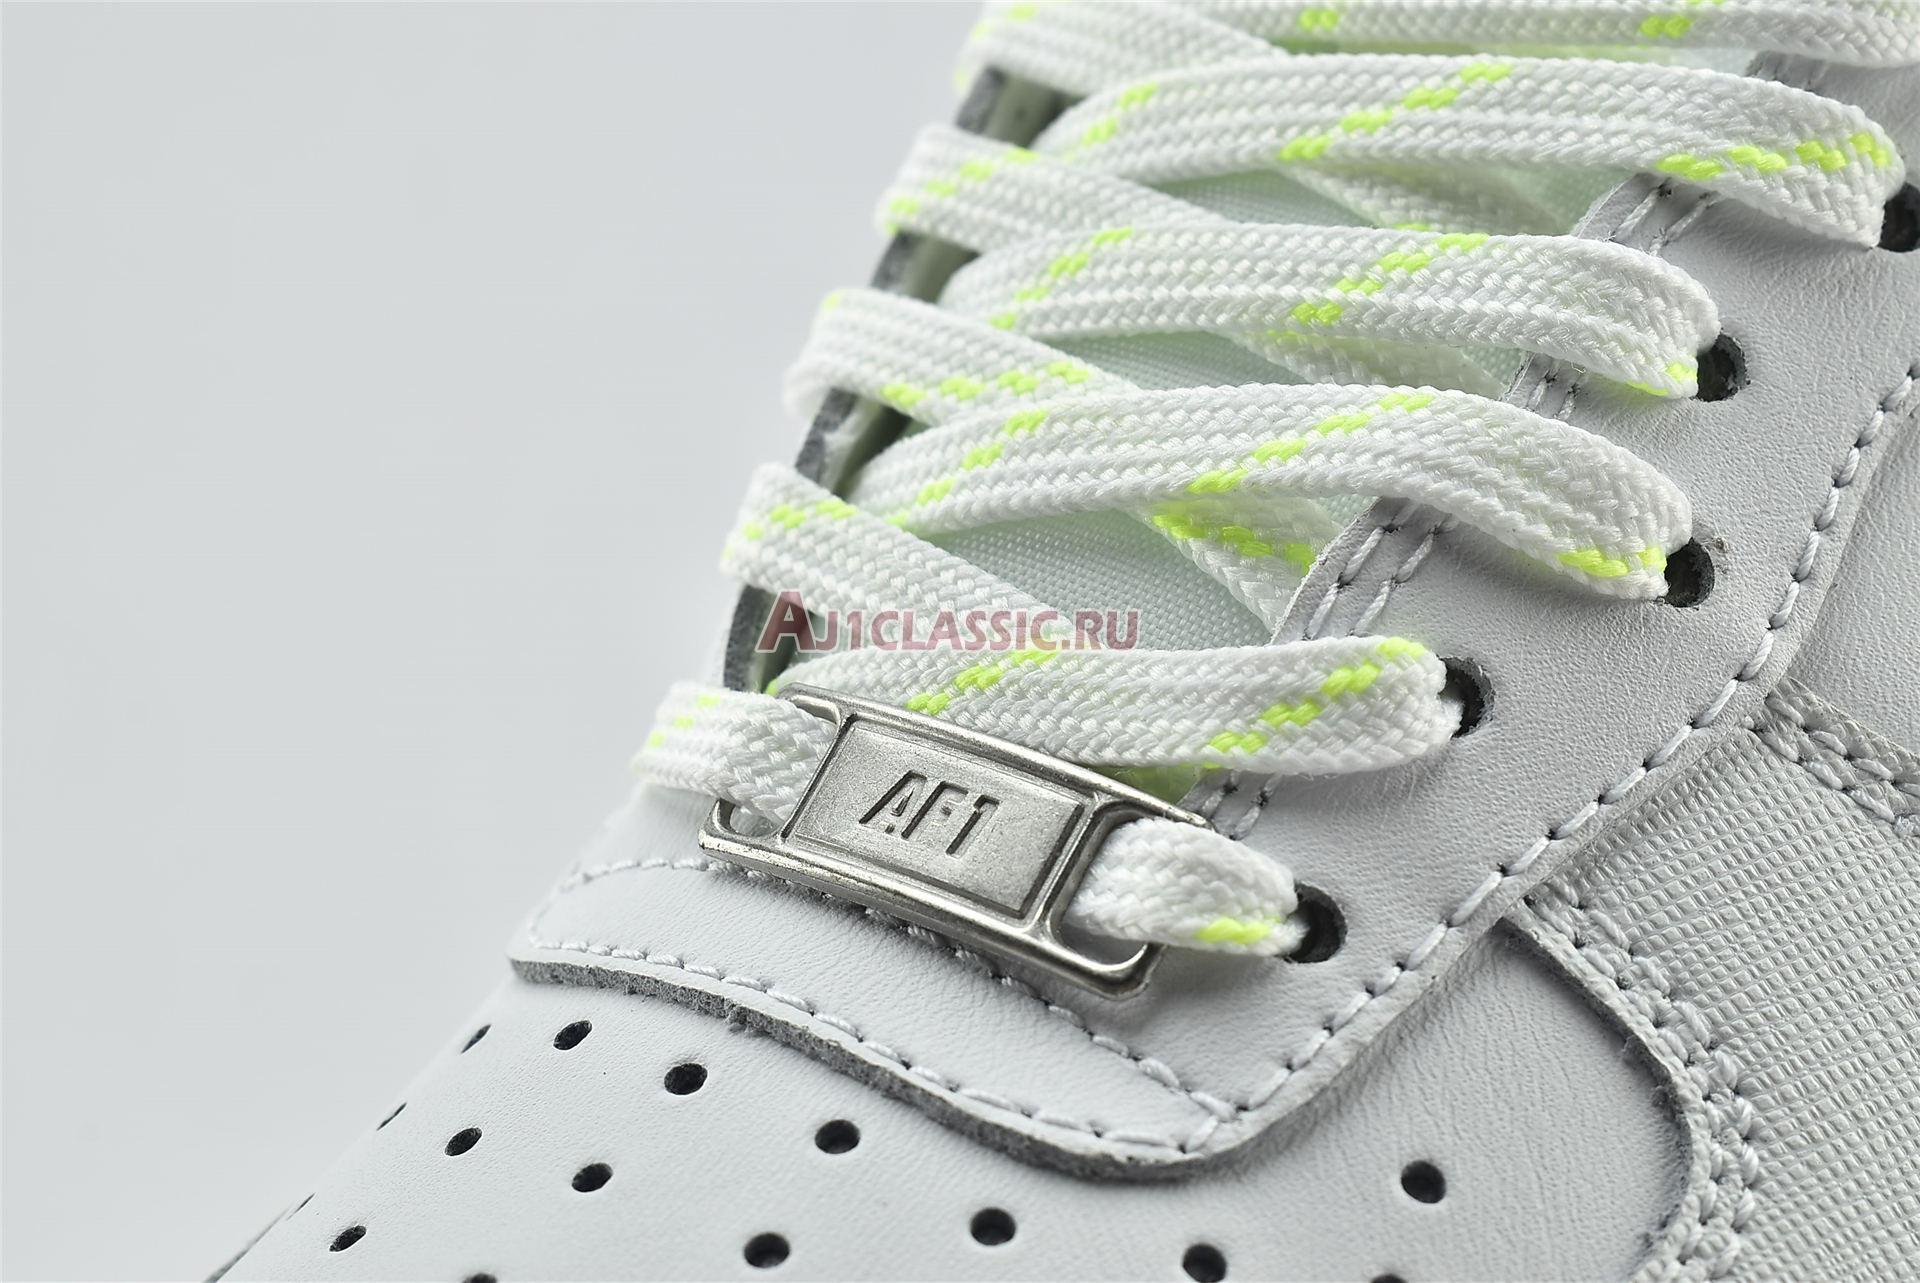 Nike Air Force 1 07 LV8 "Daisy Pack" CW5571-100